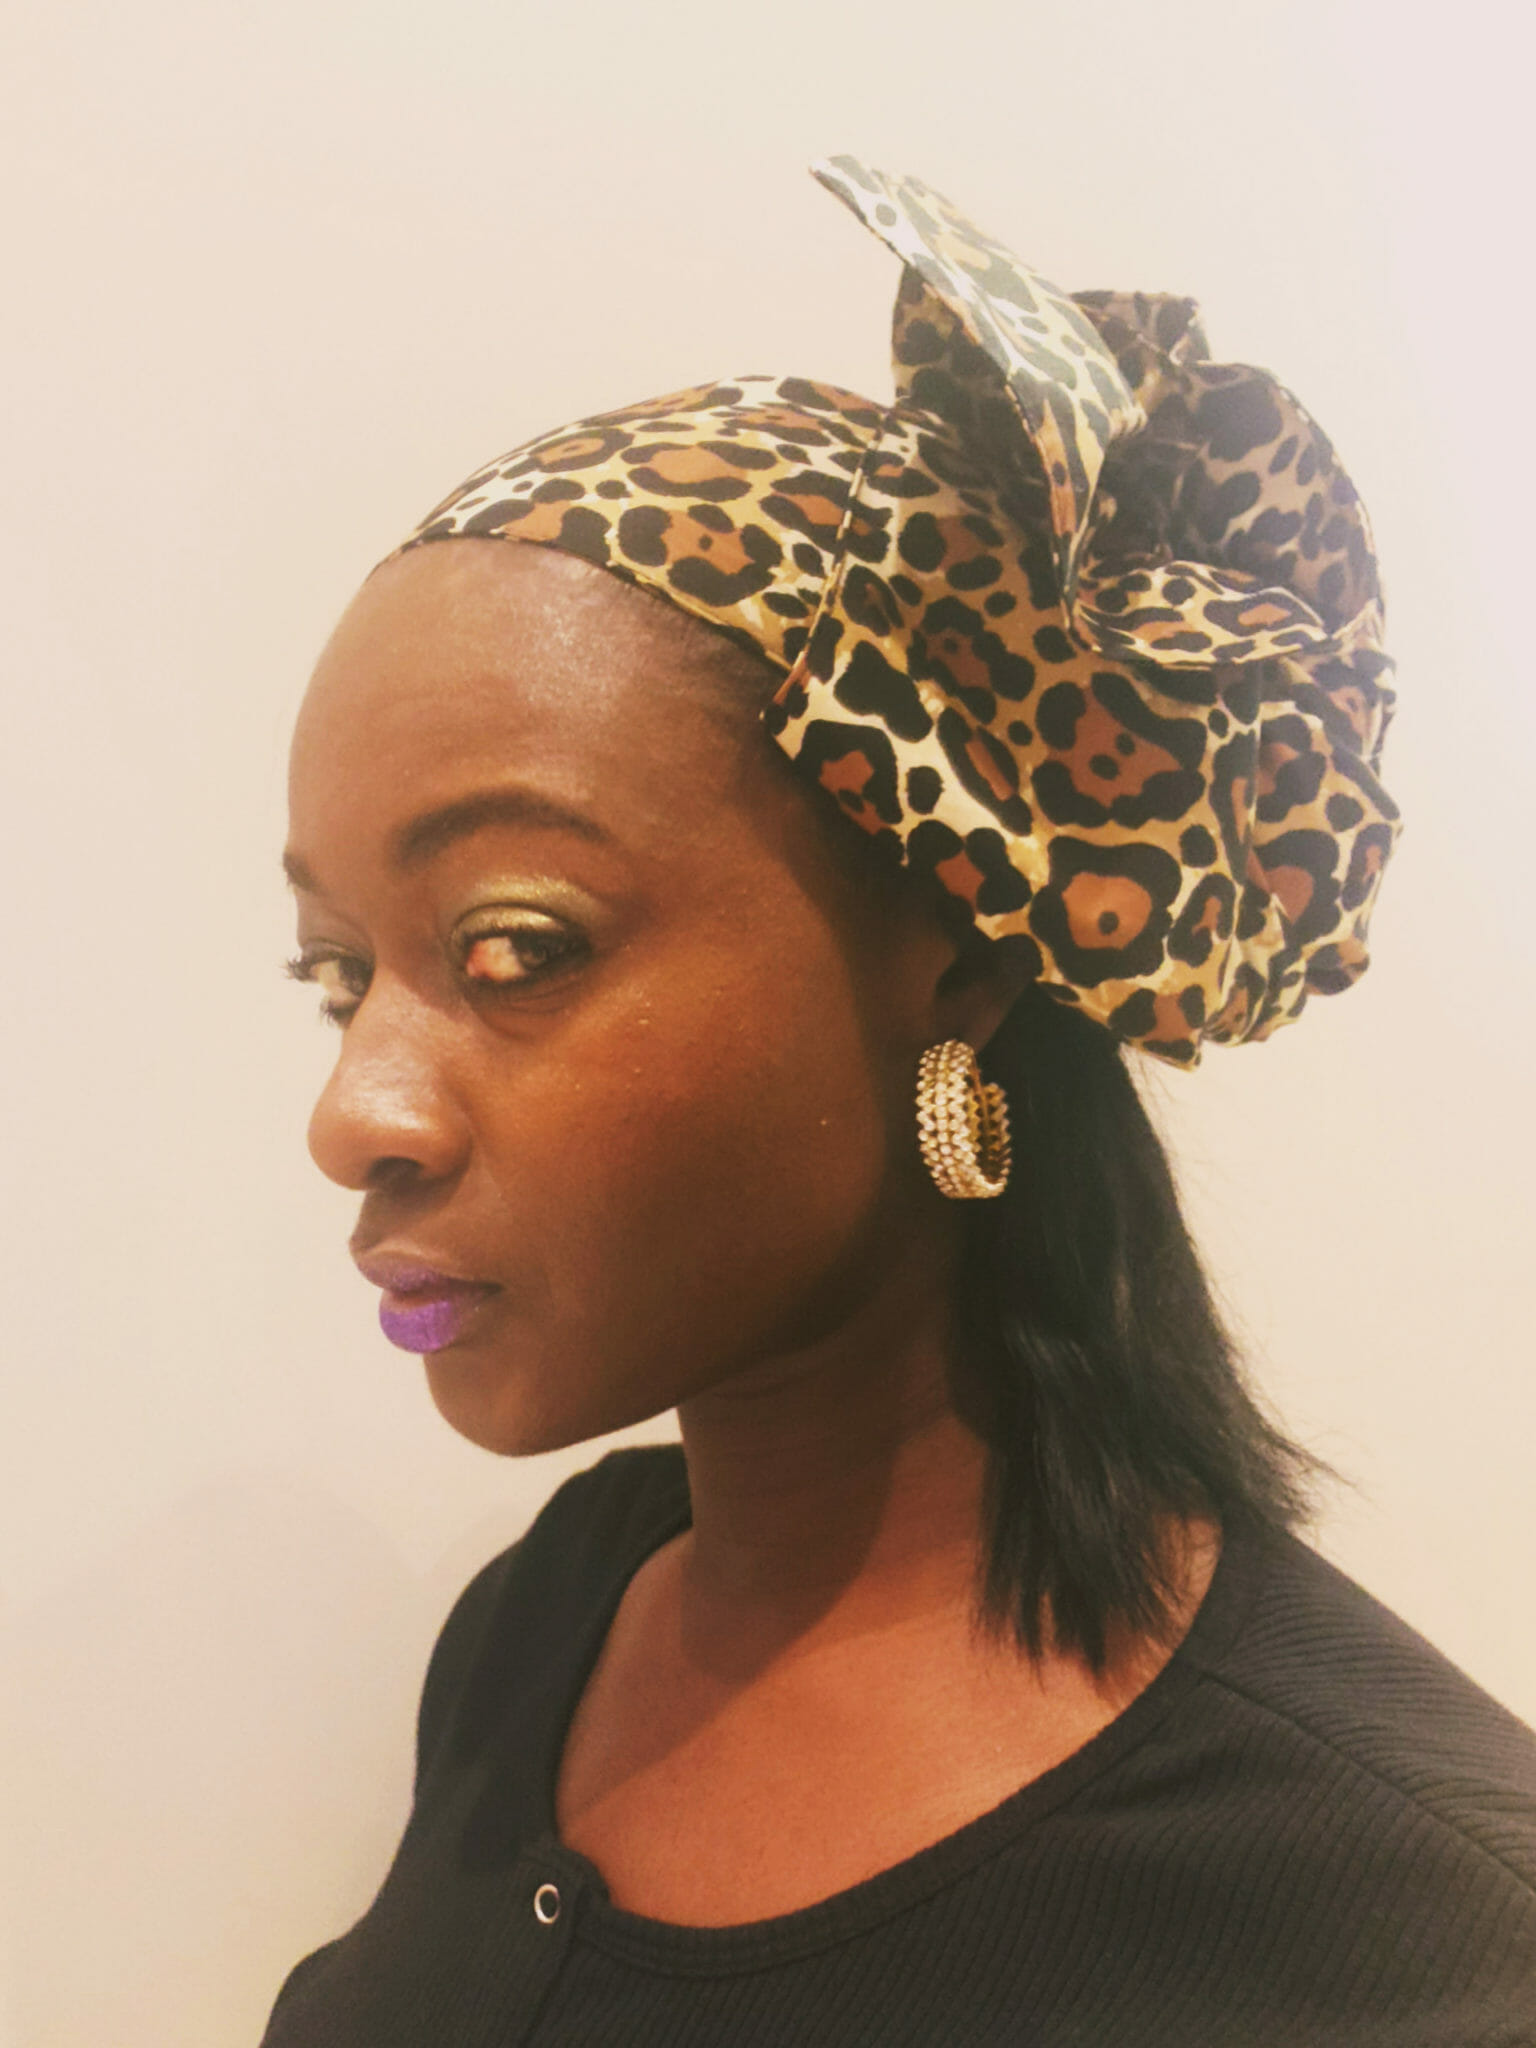 An African-American woman wearing a black dress and a cheetah print headwrap and gold hoop earrings.